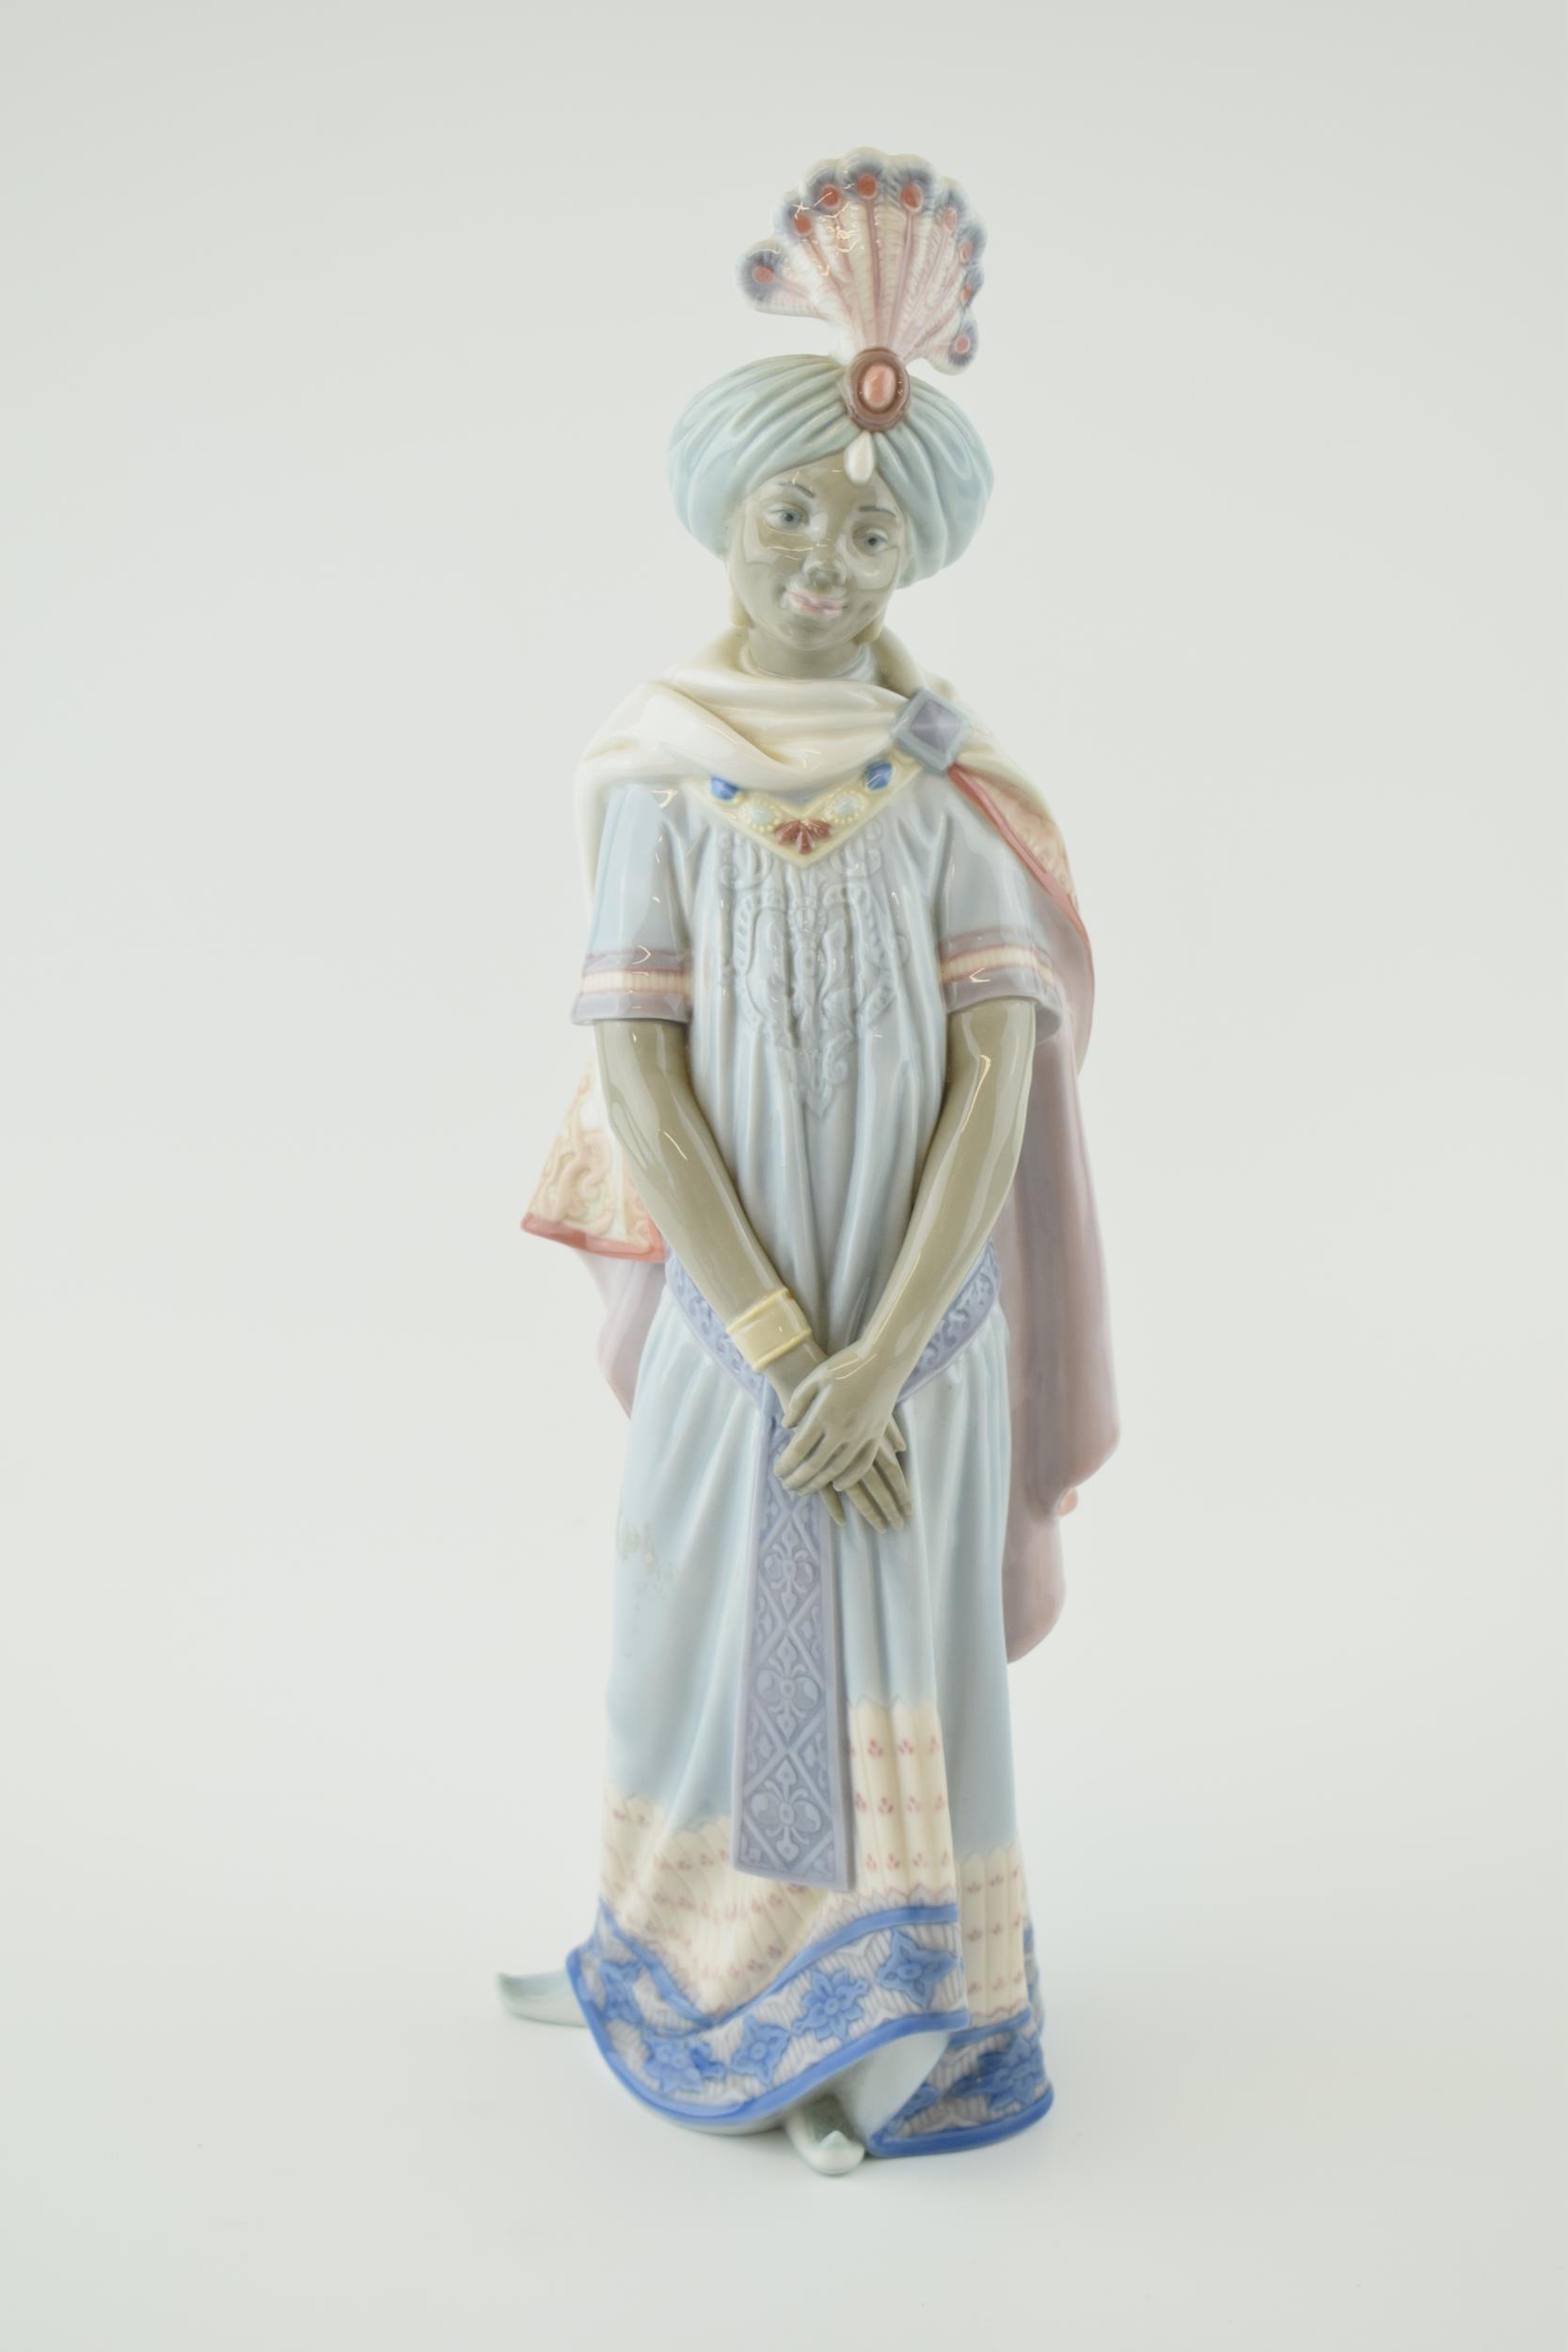 'Balthasar's Page' by Lladro, Porcelain Figurine 01001516. Height 35cm. In good condition of first